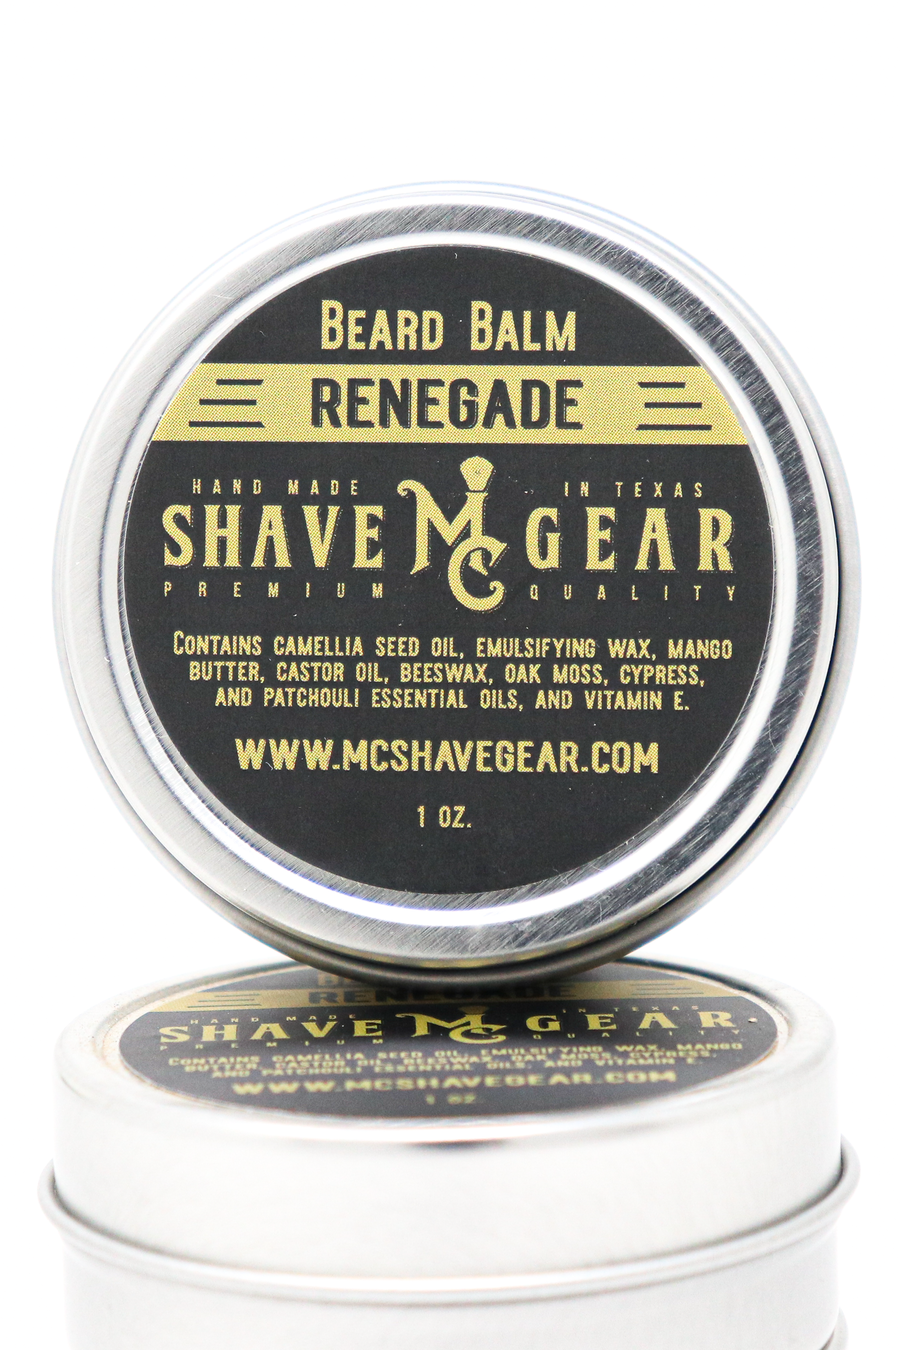 Renegade Beard Care Kit - Everything You Need for a Great Beard